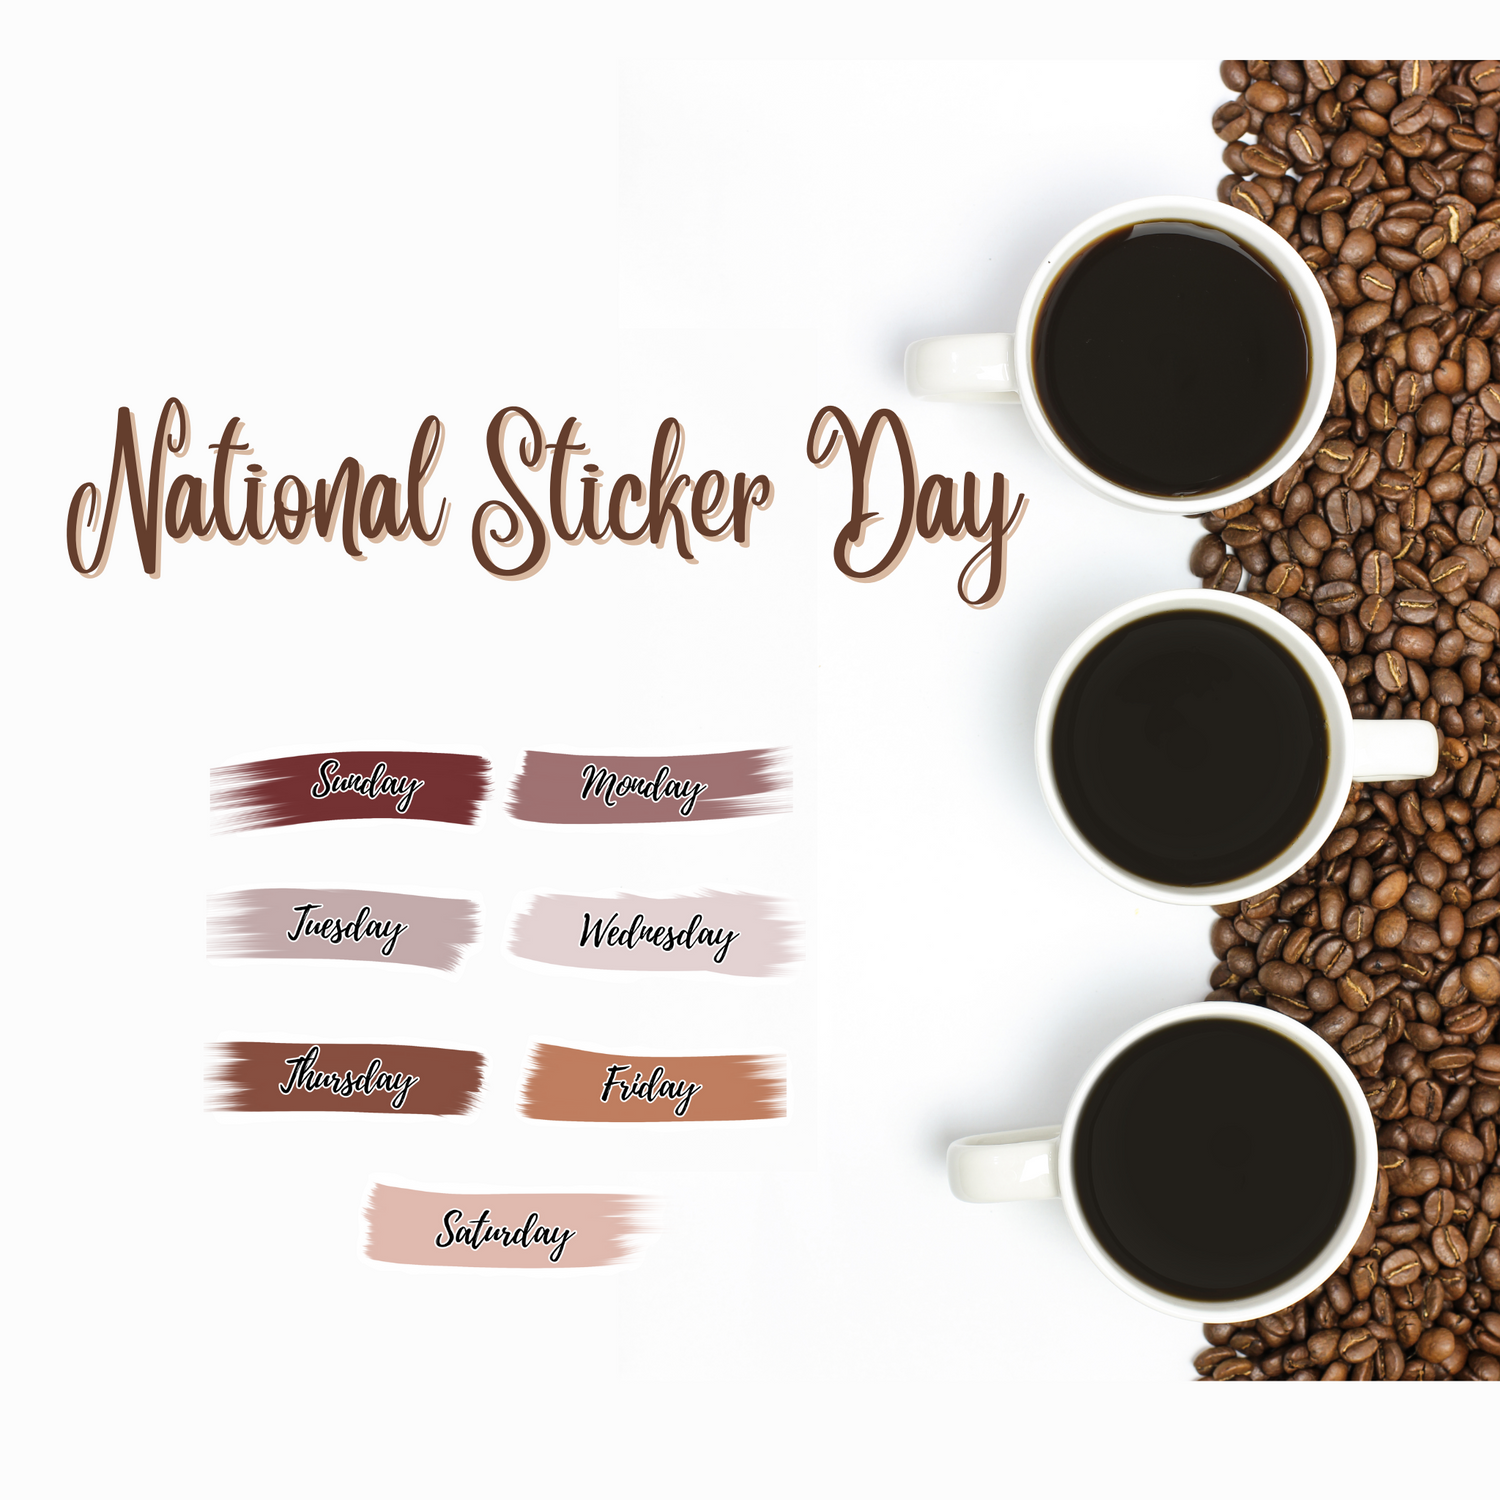 National Sticker Day Gifts